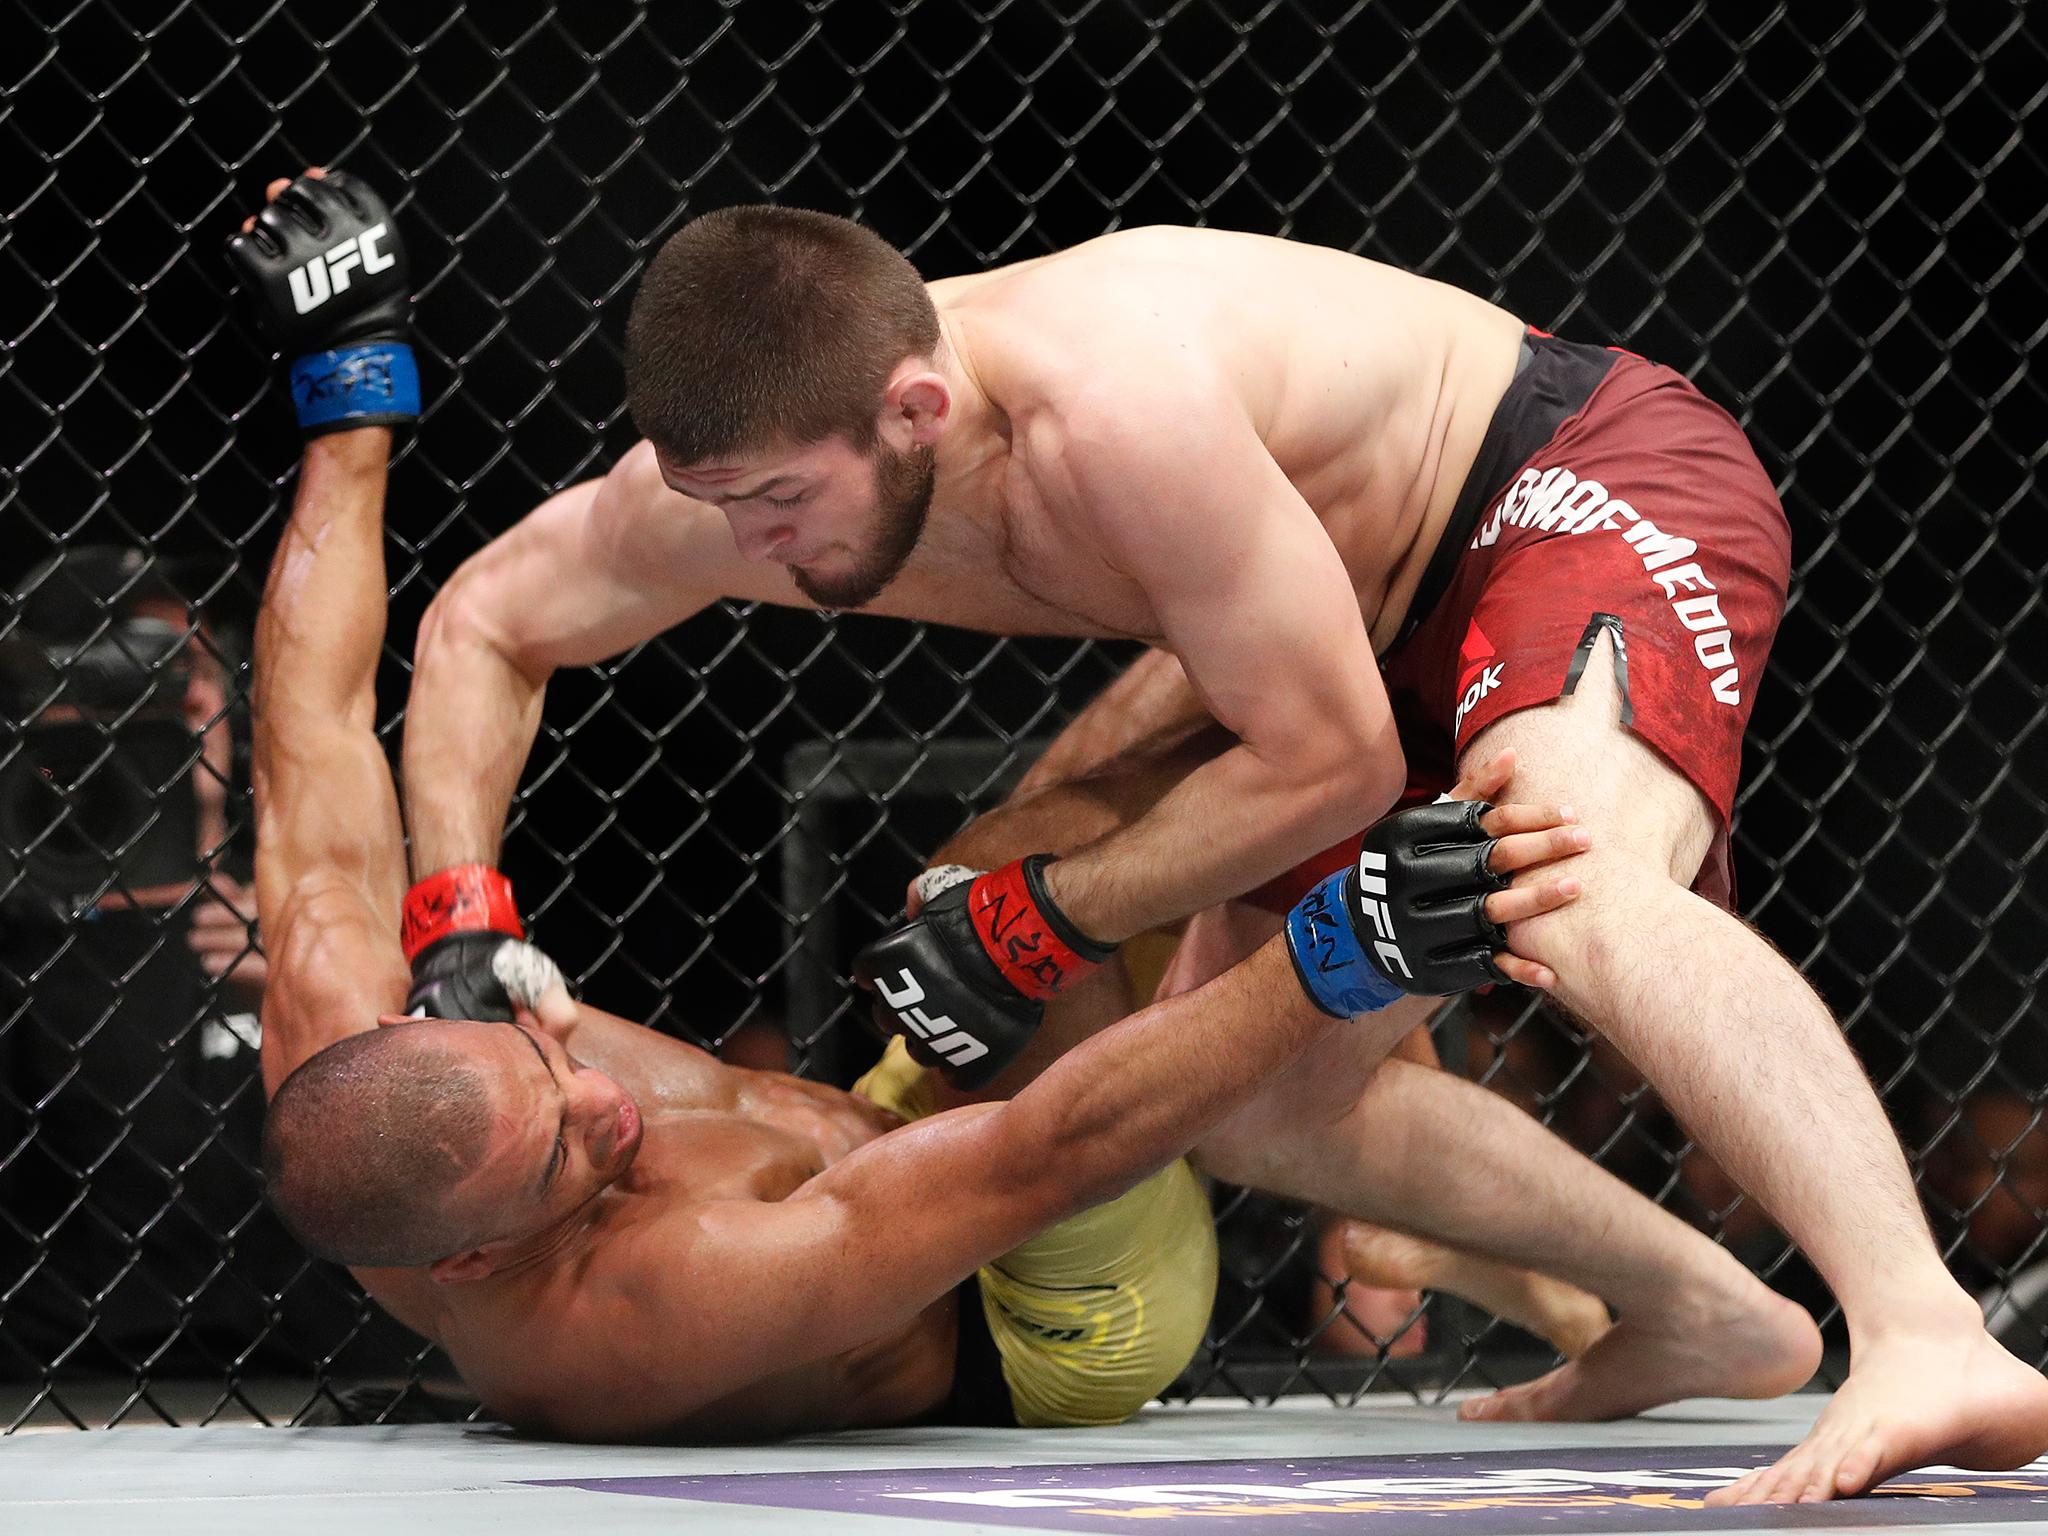 Nurmagomedov went on to call out both Conor McGregor and Tony Ferguson